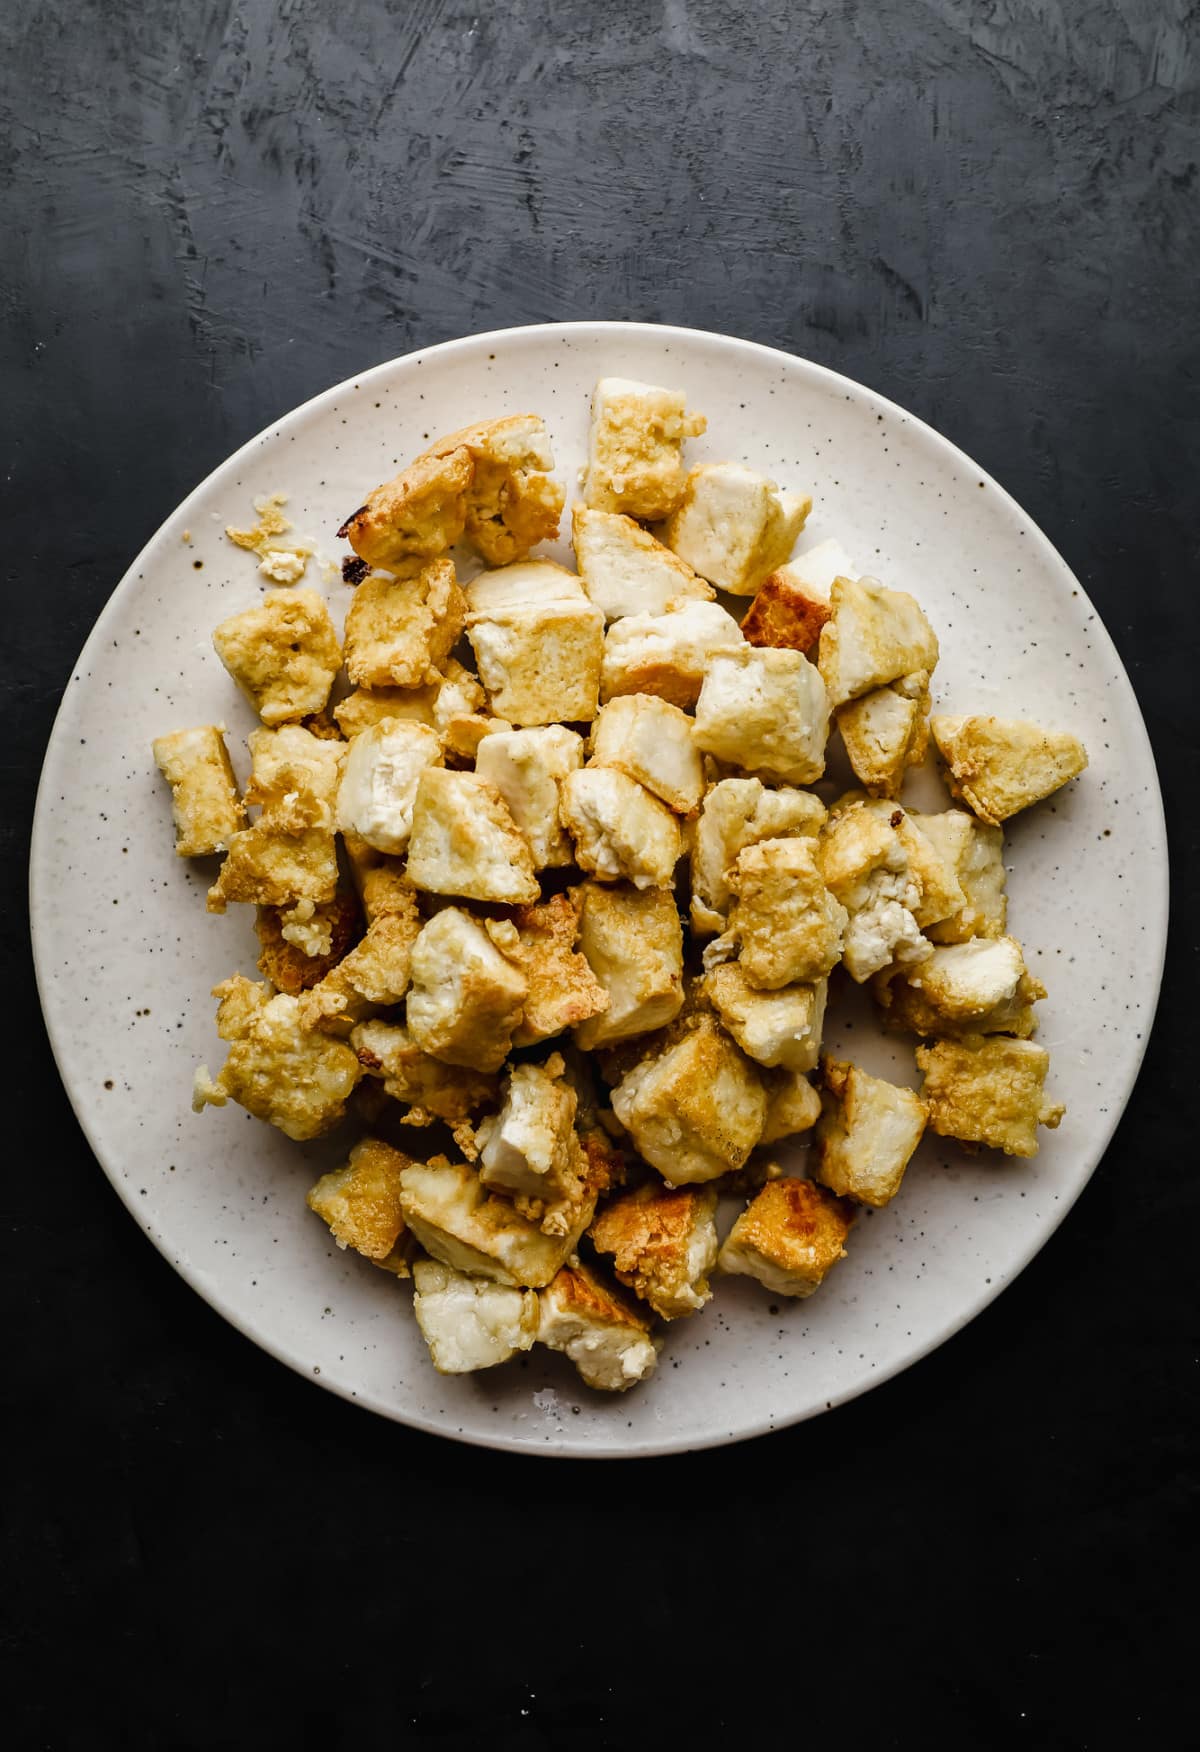 a pile of fried tofu pieces on a white plate.